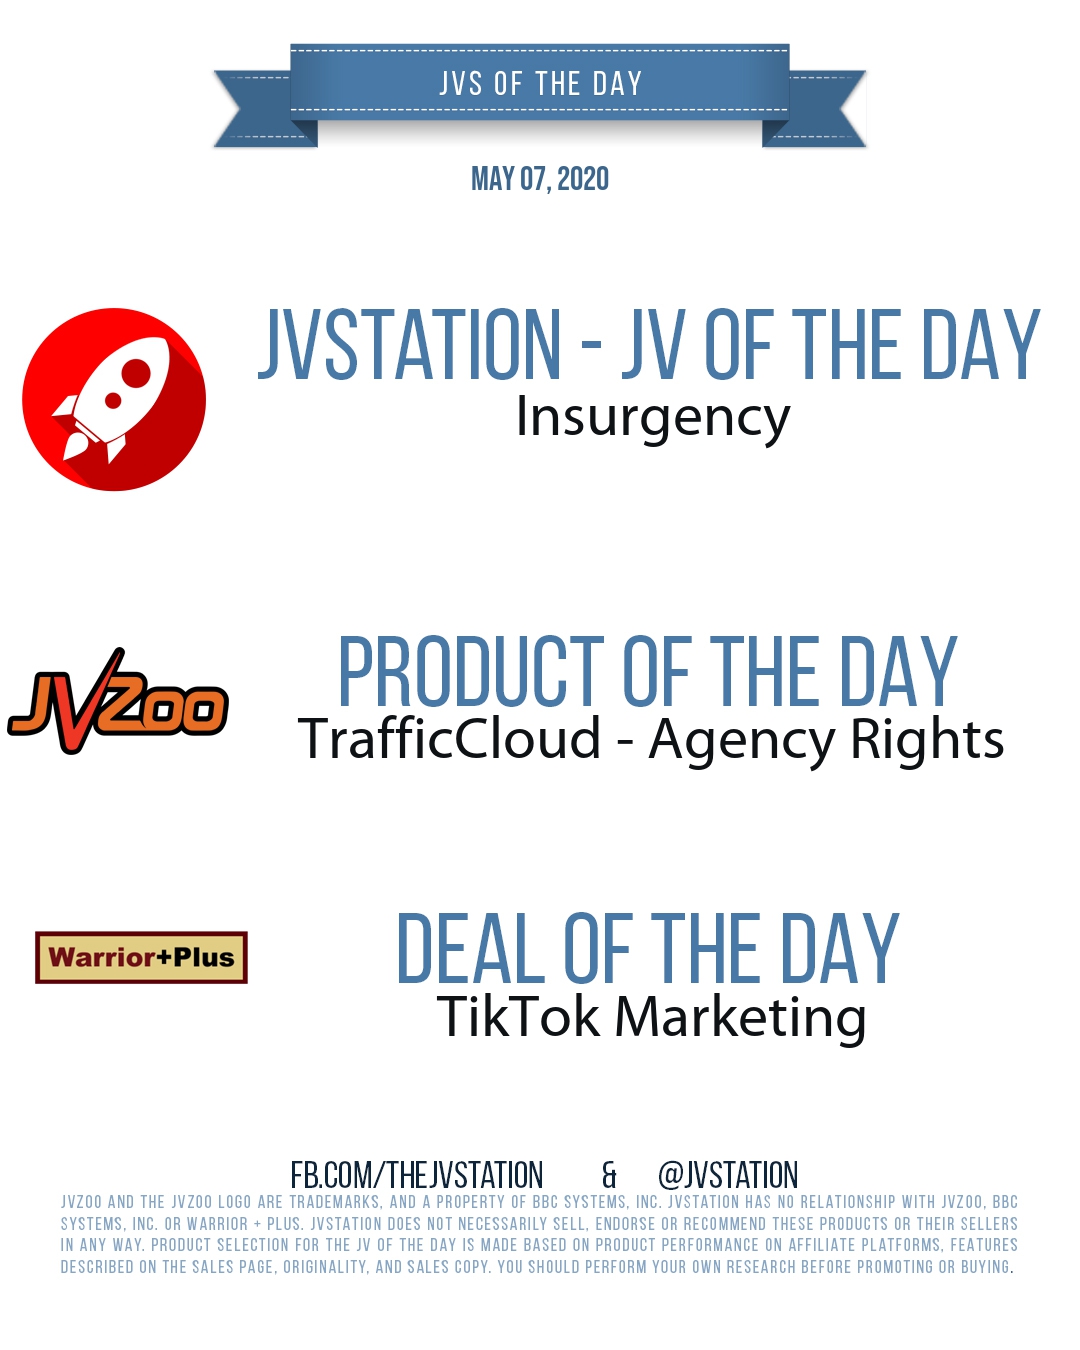 JVs of the day - May 07, 2020